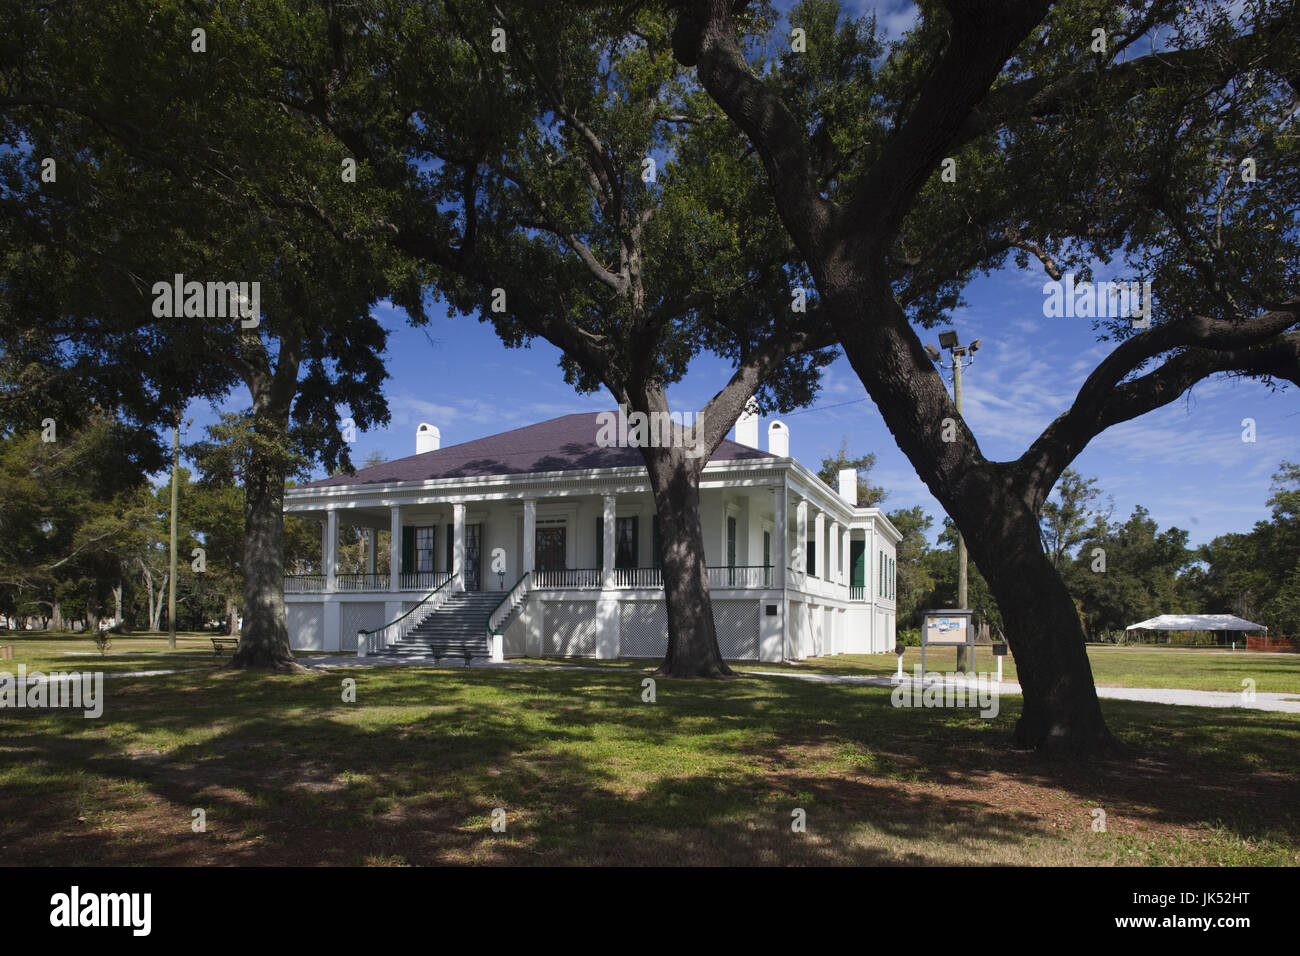 USA, Mississippi, Biloxi, Beauvoir, The Jefferson Davis Home and Presidential Library, former home of US Civil War-era Confederate President, Beauvoir House Stock Photo